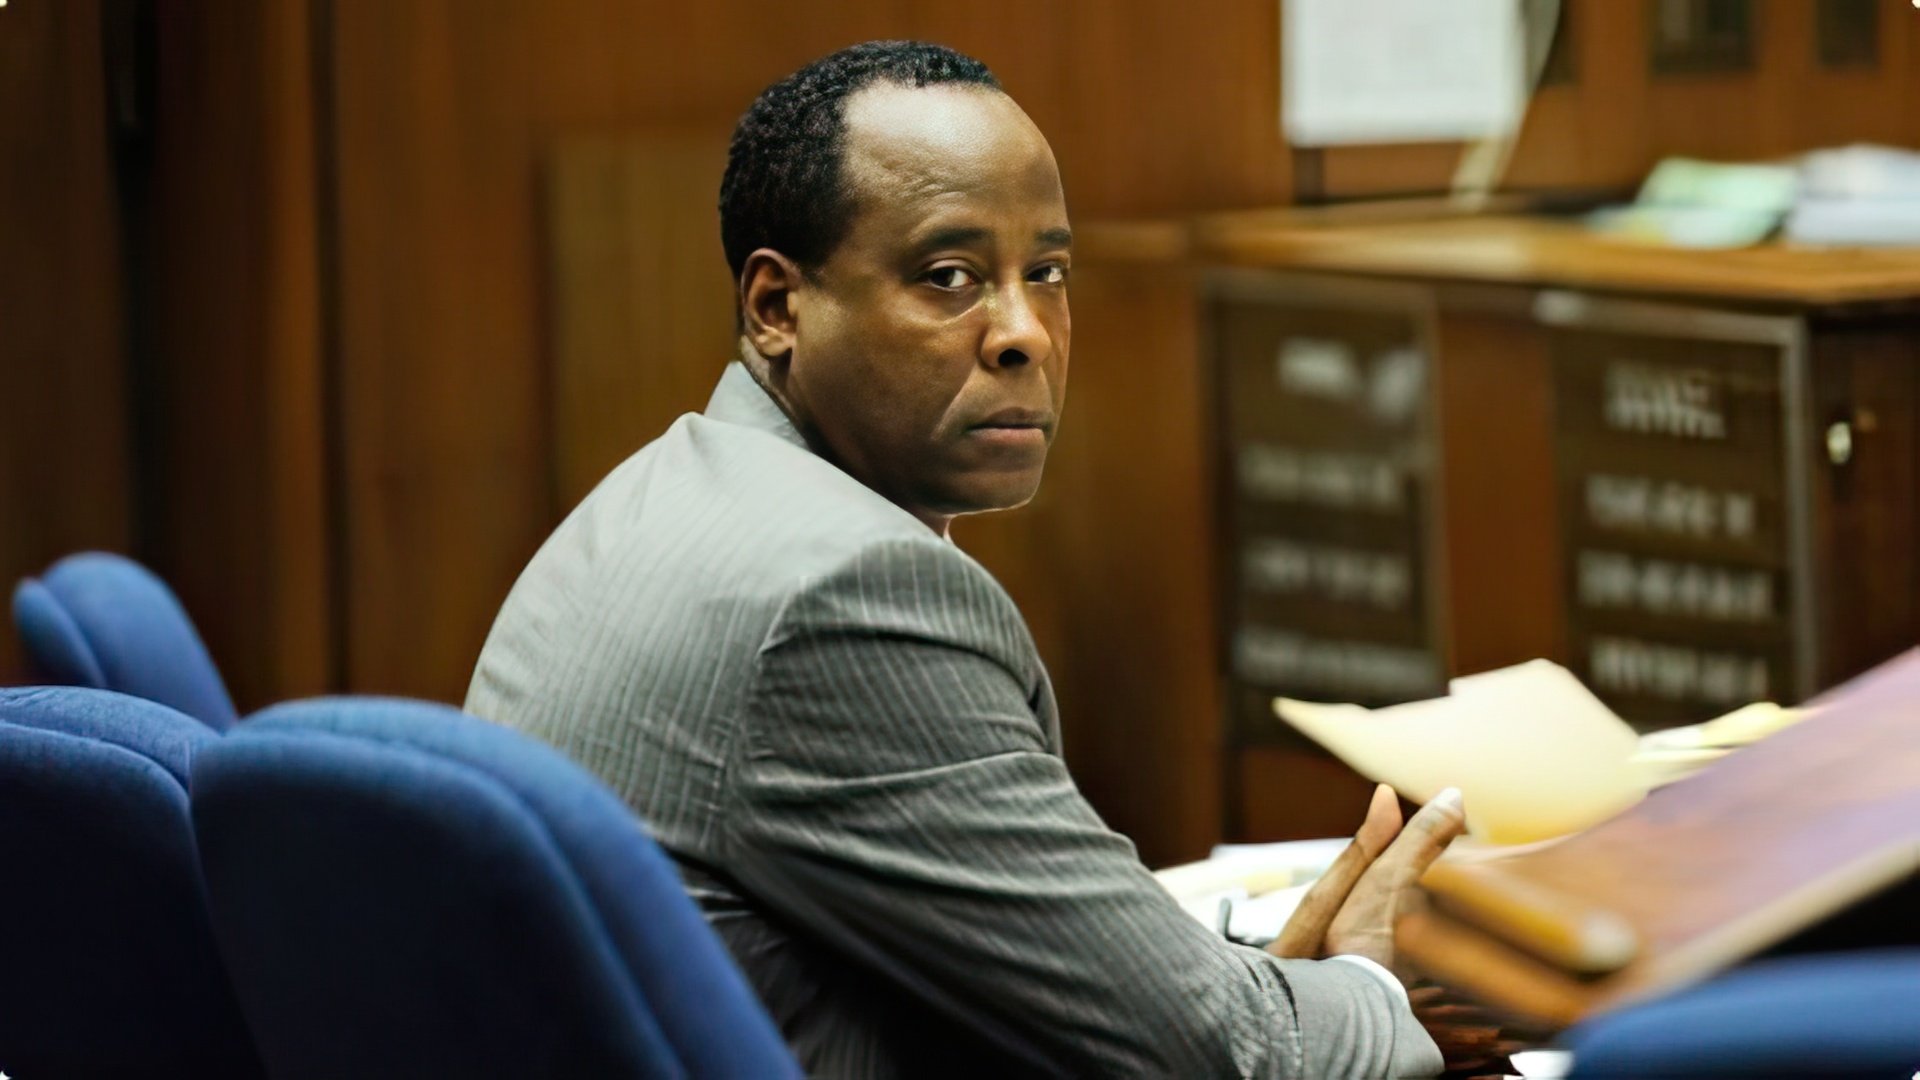 Conrad Murray agreed with the court's decision